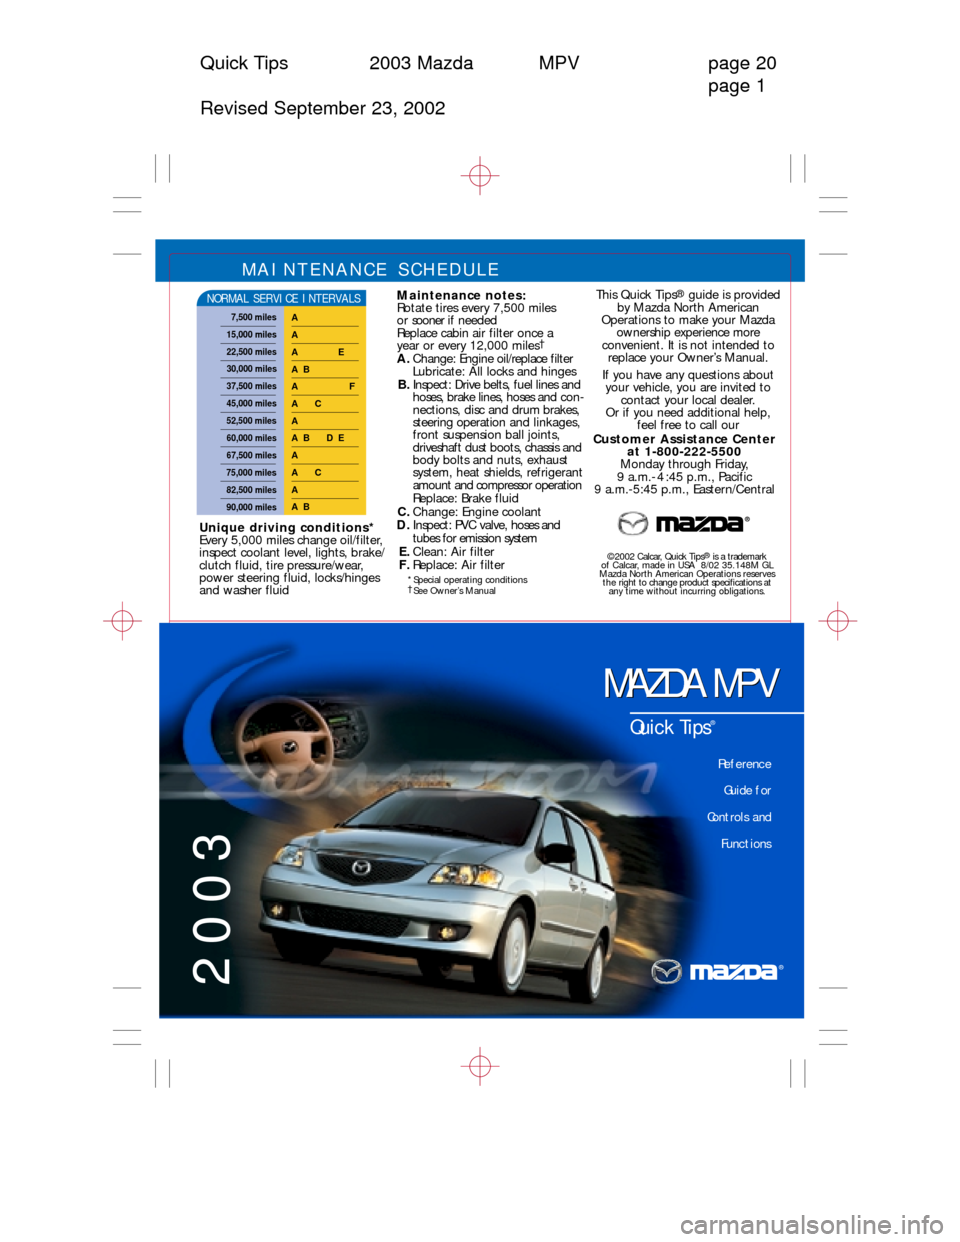 MAZDA MODEL MPV 2003  Quick Tips (in English) Quick Tips 2003 Mazda MPV page 20
page 1
Revised September 23, 2002
MAINTENANCE SCHEDULE 
Maintenance notes:
Rotate tires every 7,500 miles 
o r  sooner if needed
Replace cabin air filter once a 
year